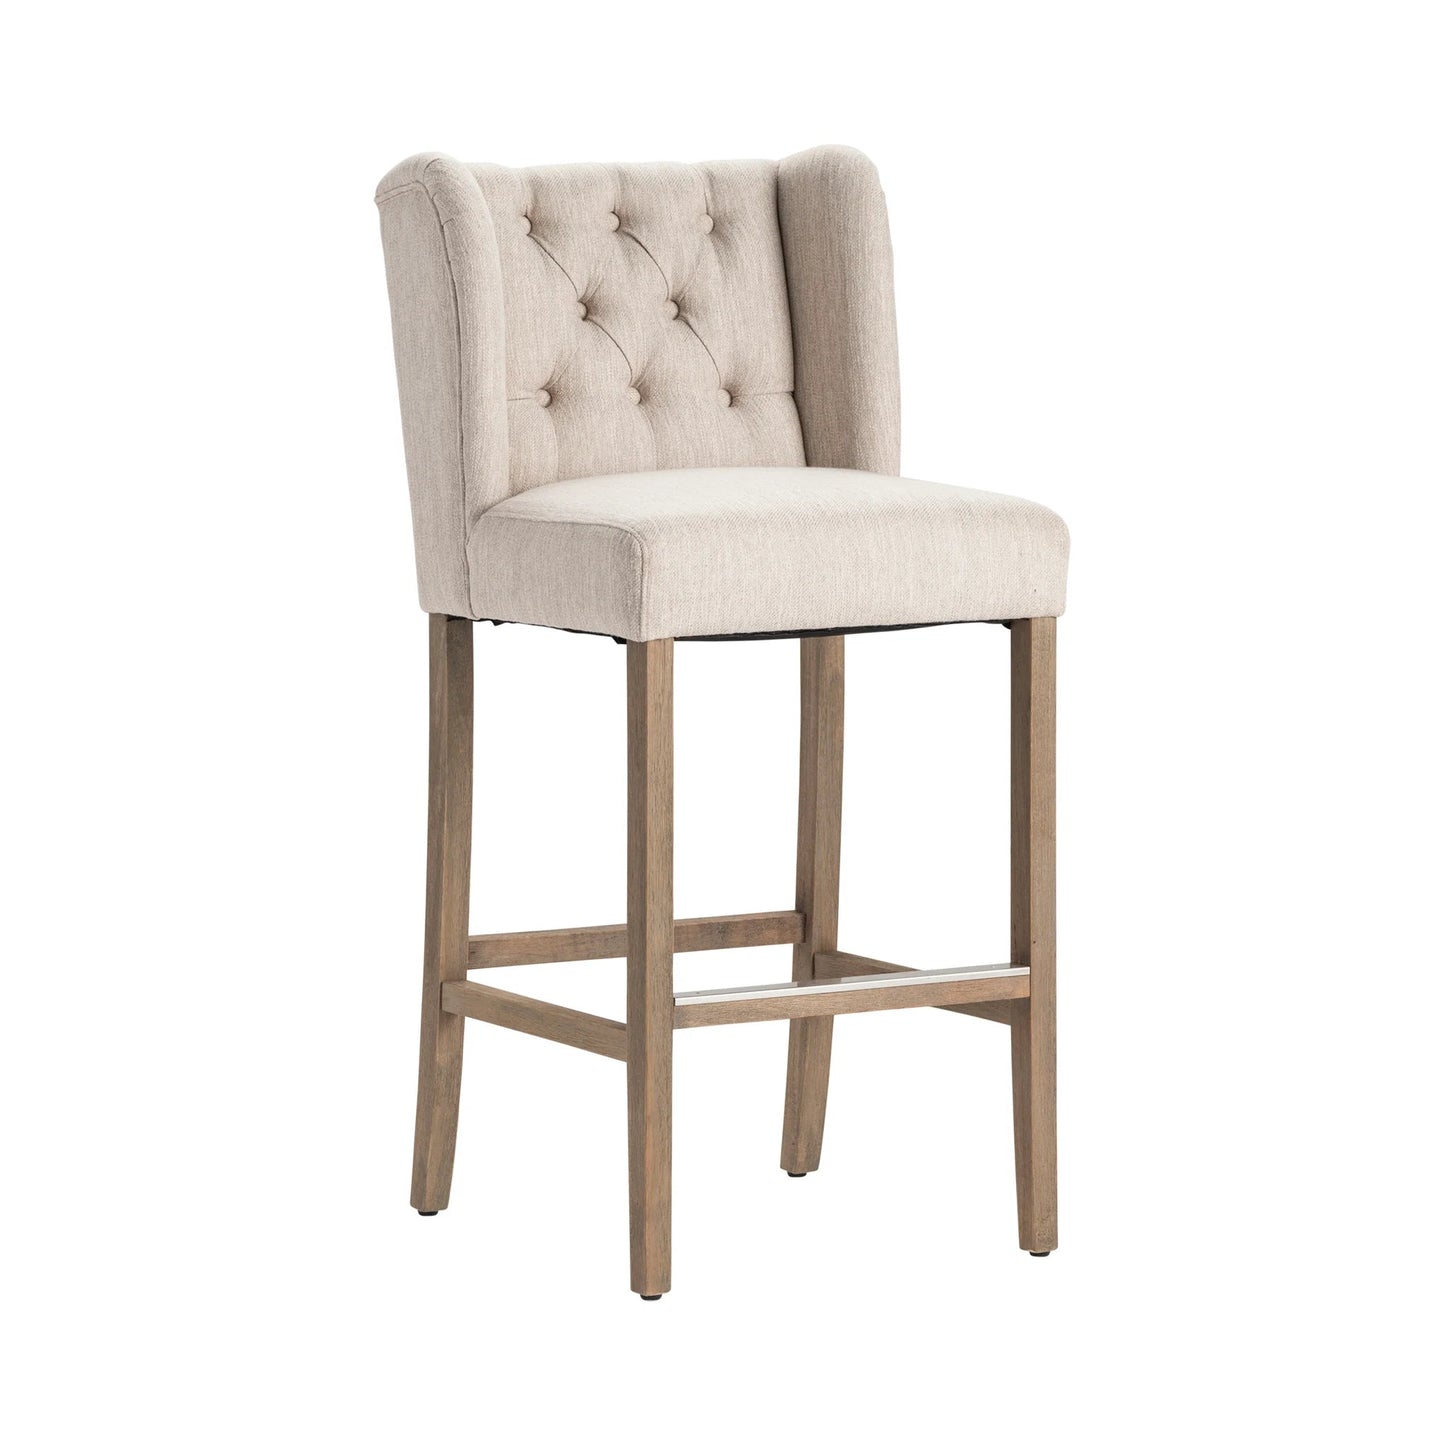 Crestview Collection Stanton 19" x 21" x 41" Traditional Fabric And Wood Bar Stool